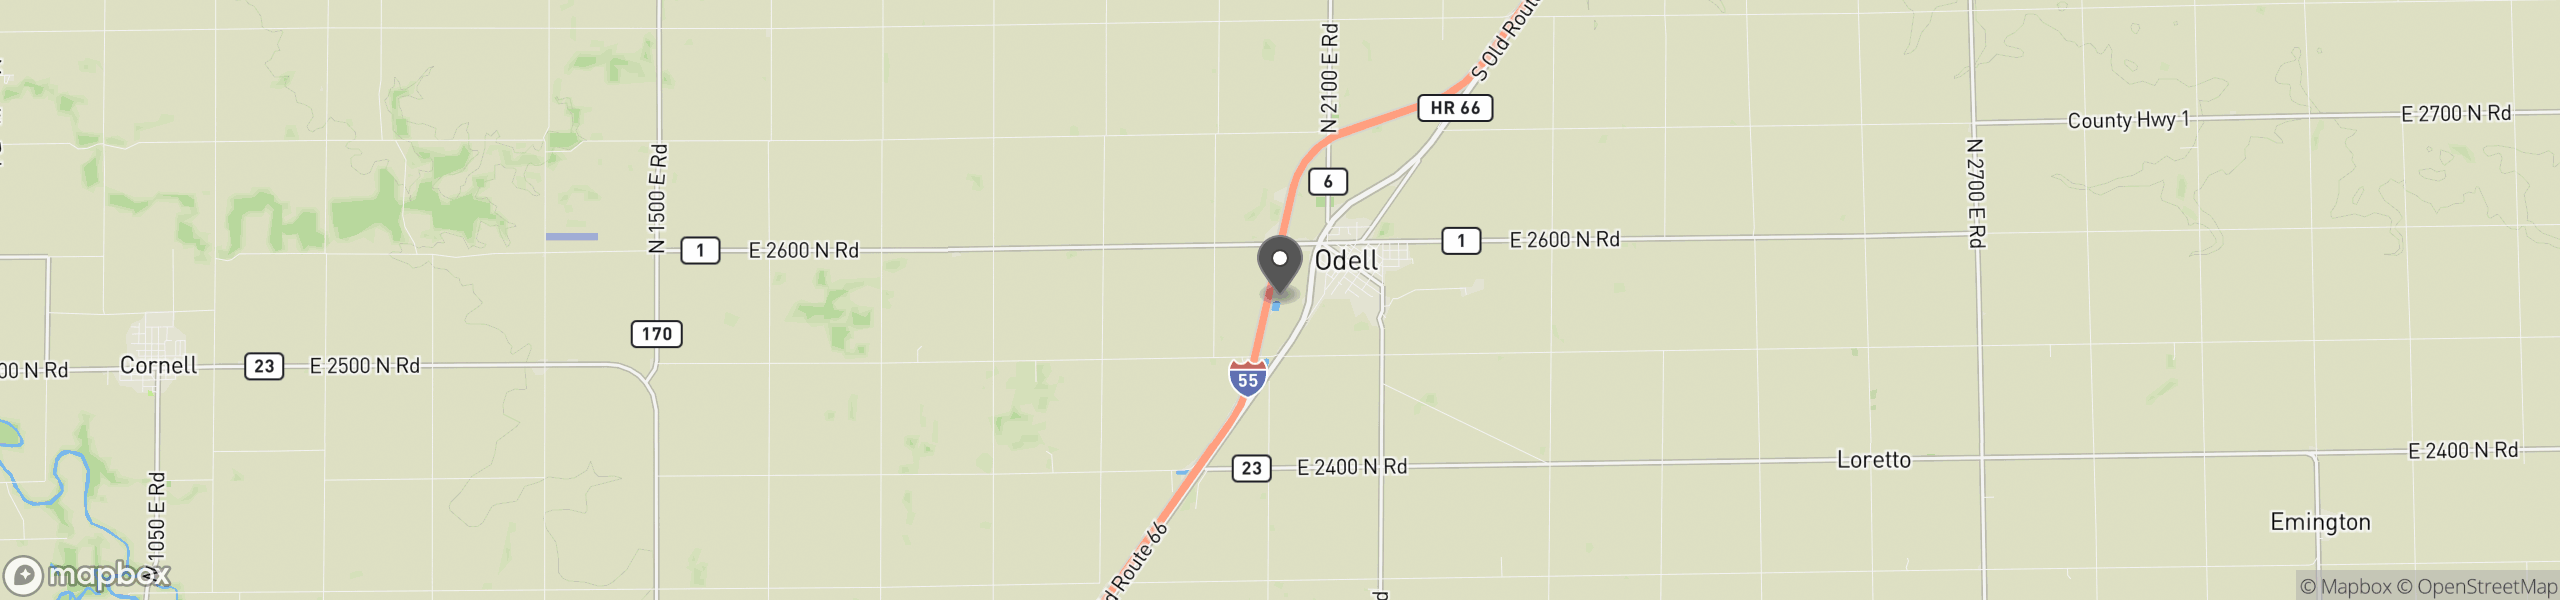 Odell, IL 60460